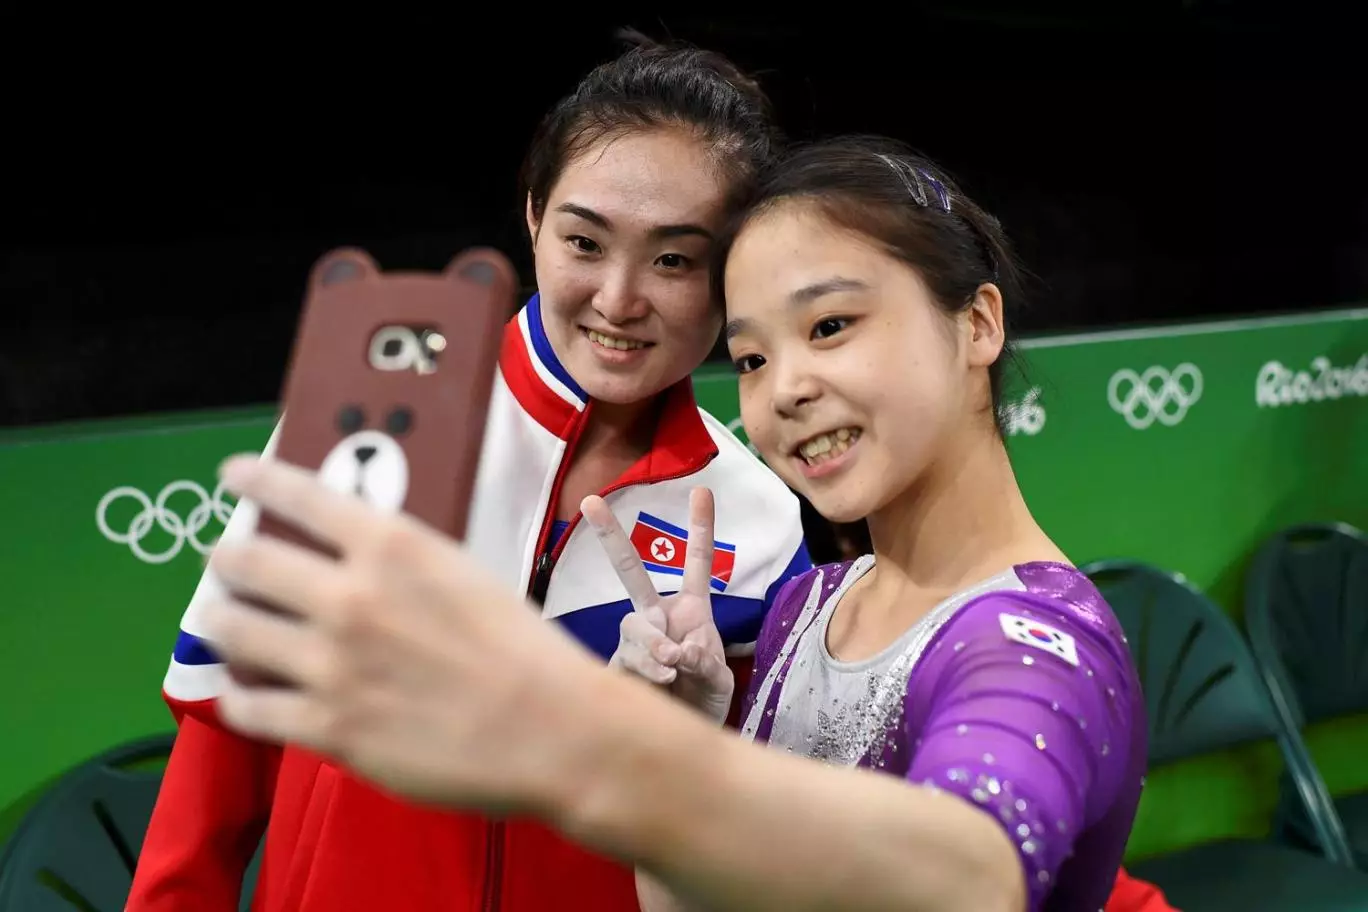 The Rio 2016 Selfie That Brought Two Countries At War Together